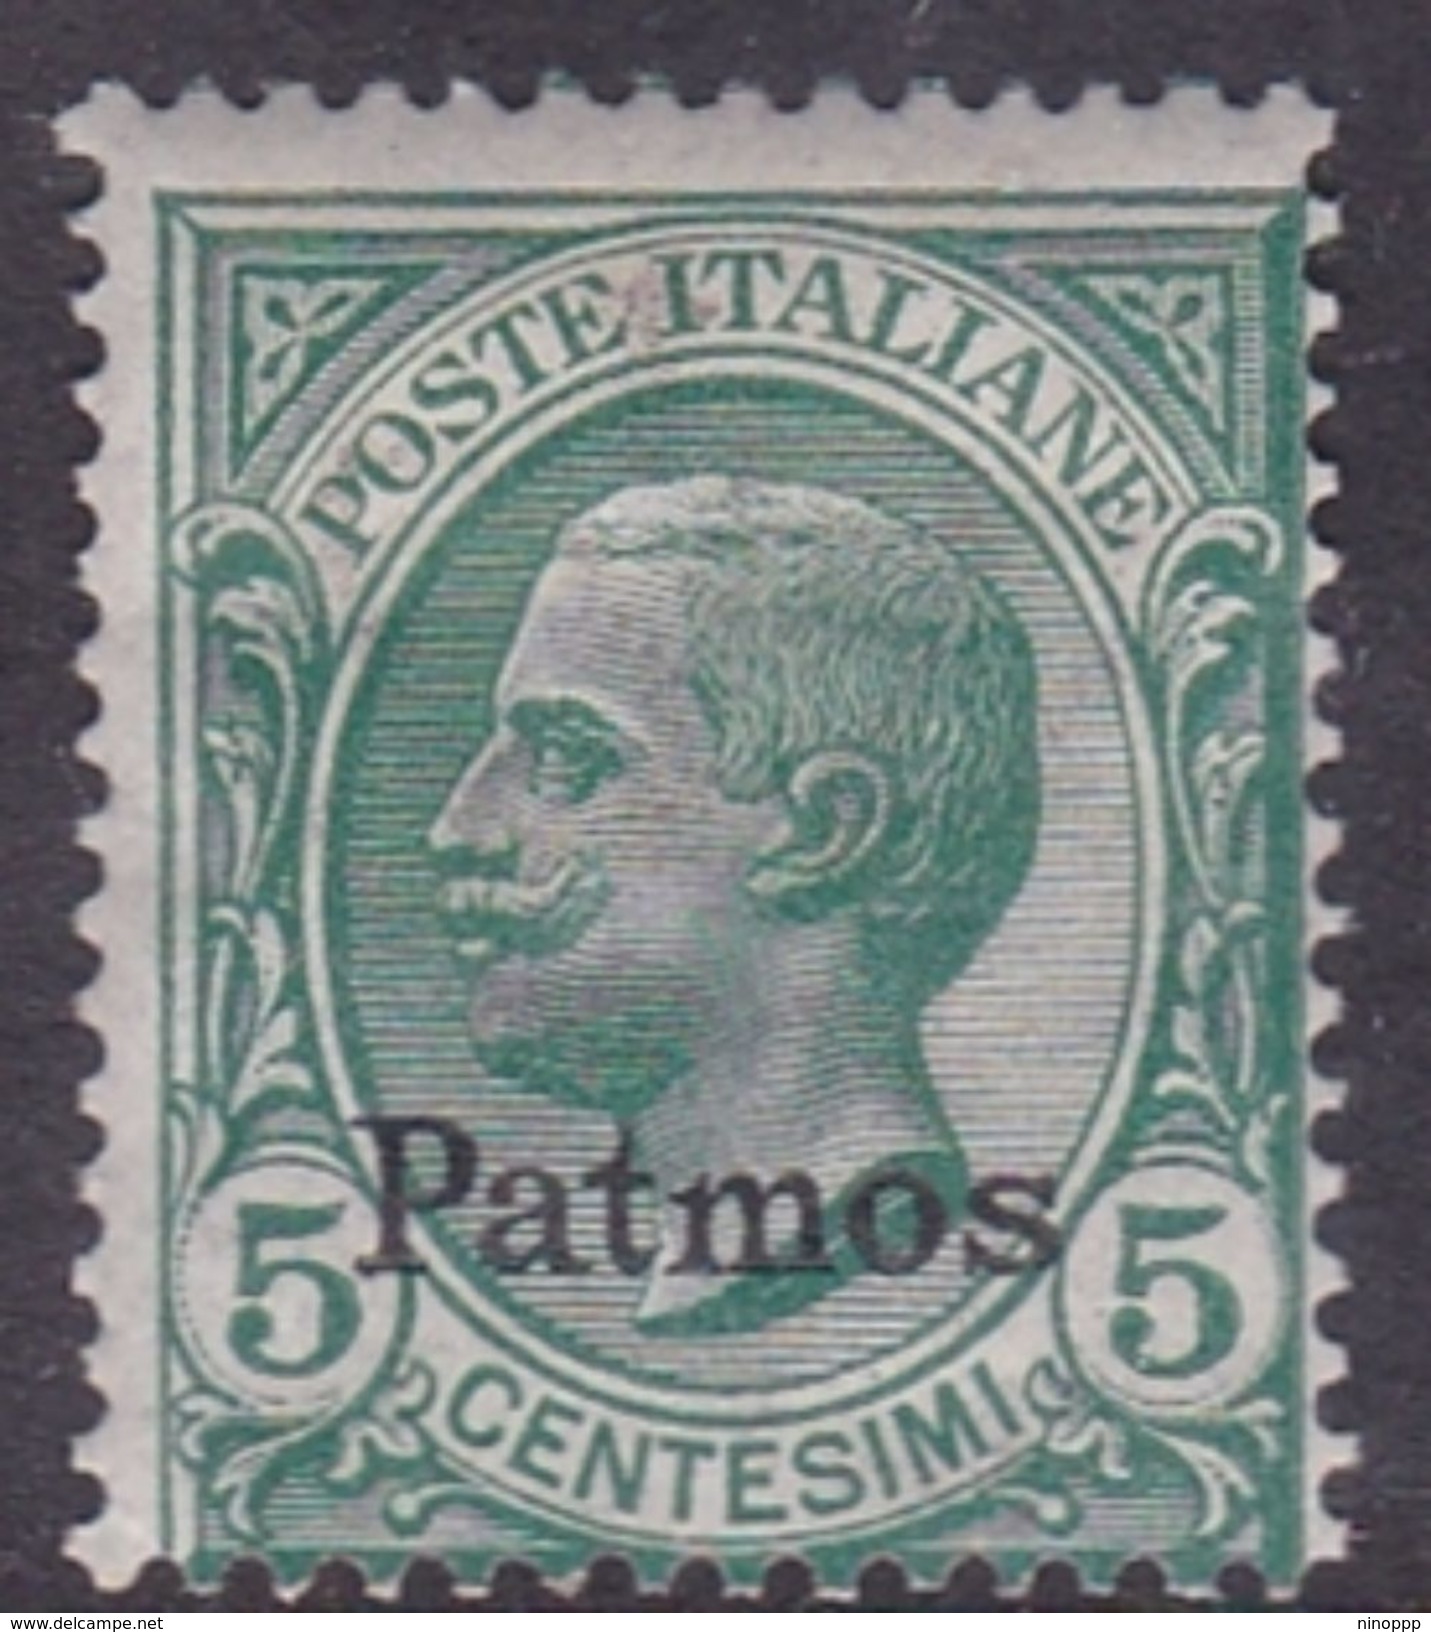 Italy-Colonies And Territories-Aegean-Patmo S 2  1912  5c Green MH - Egée (Patmo)